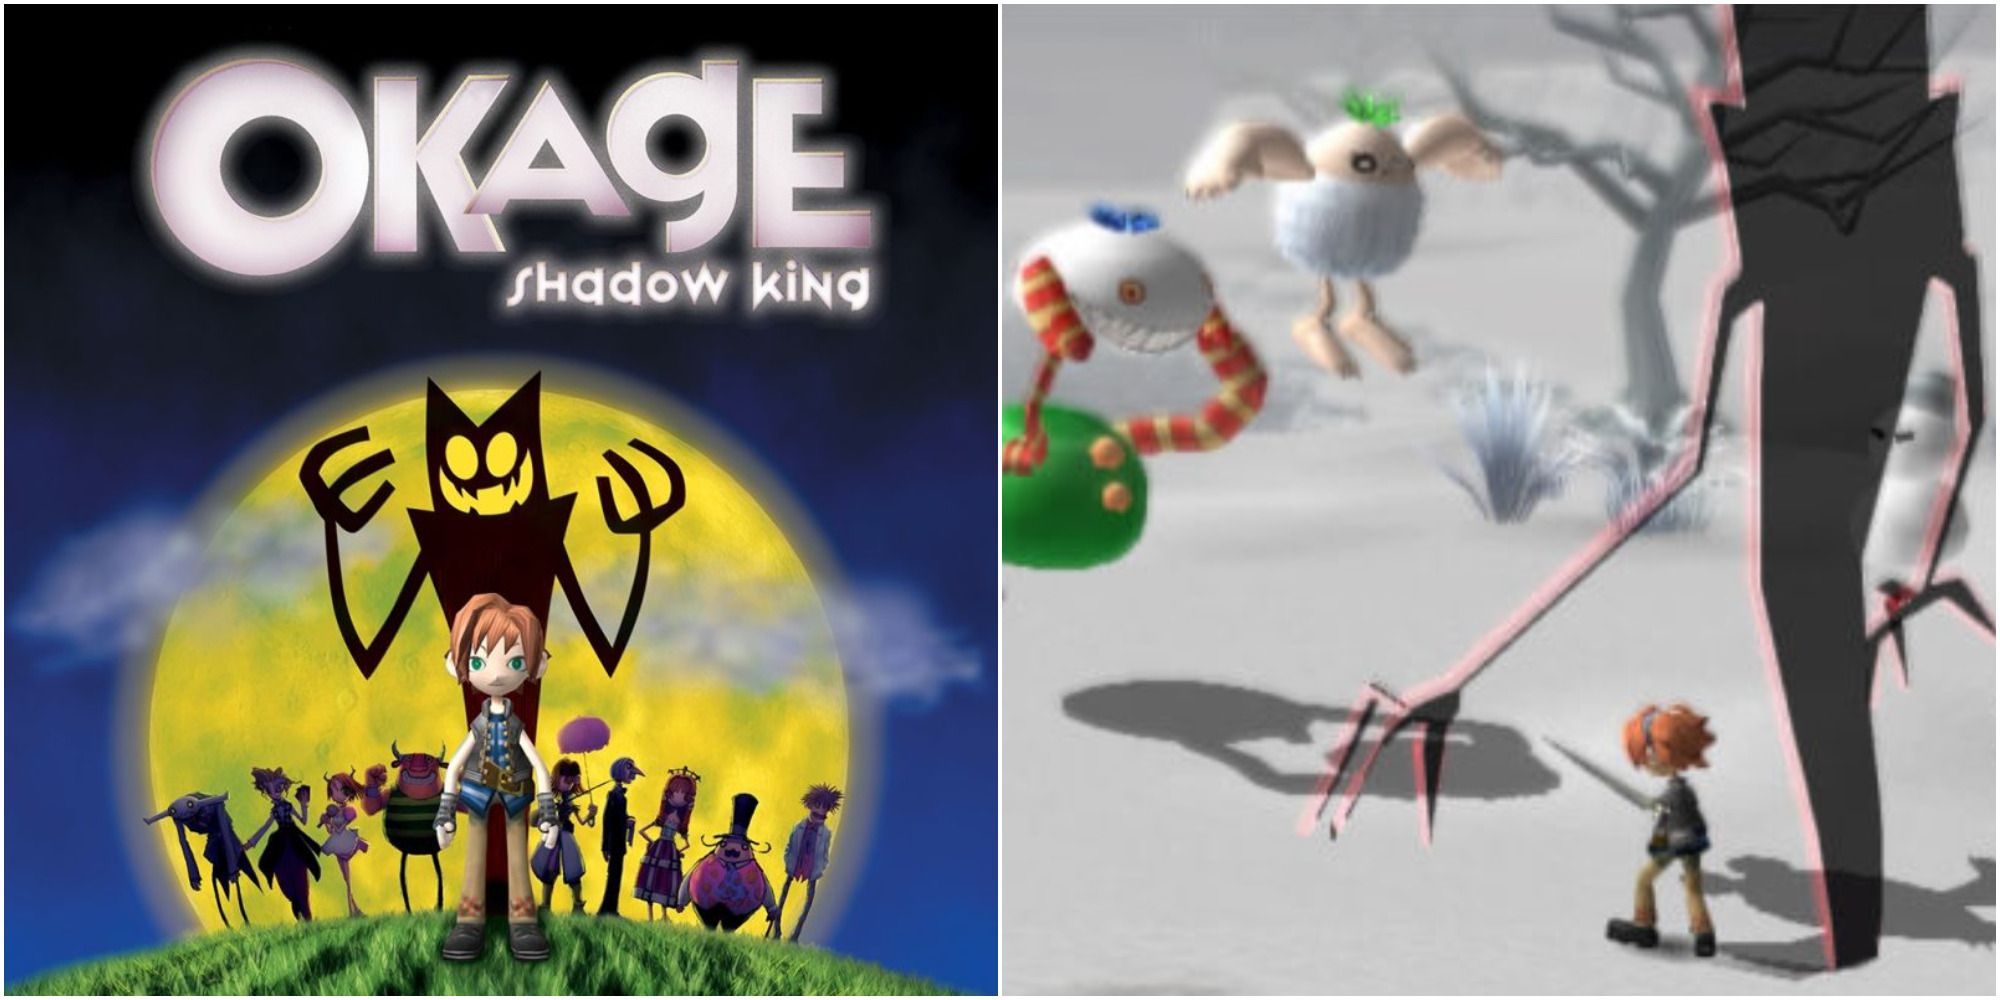 okage shadow king cover & gameplay